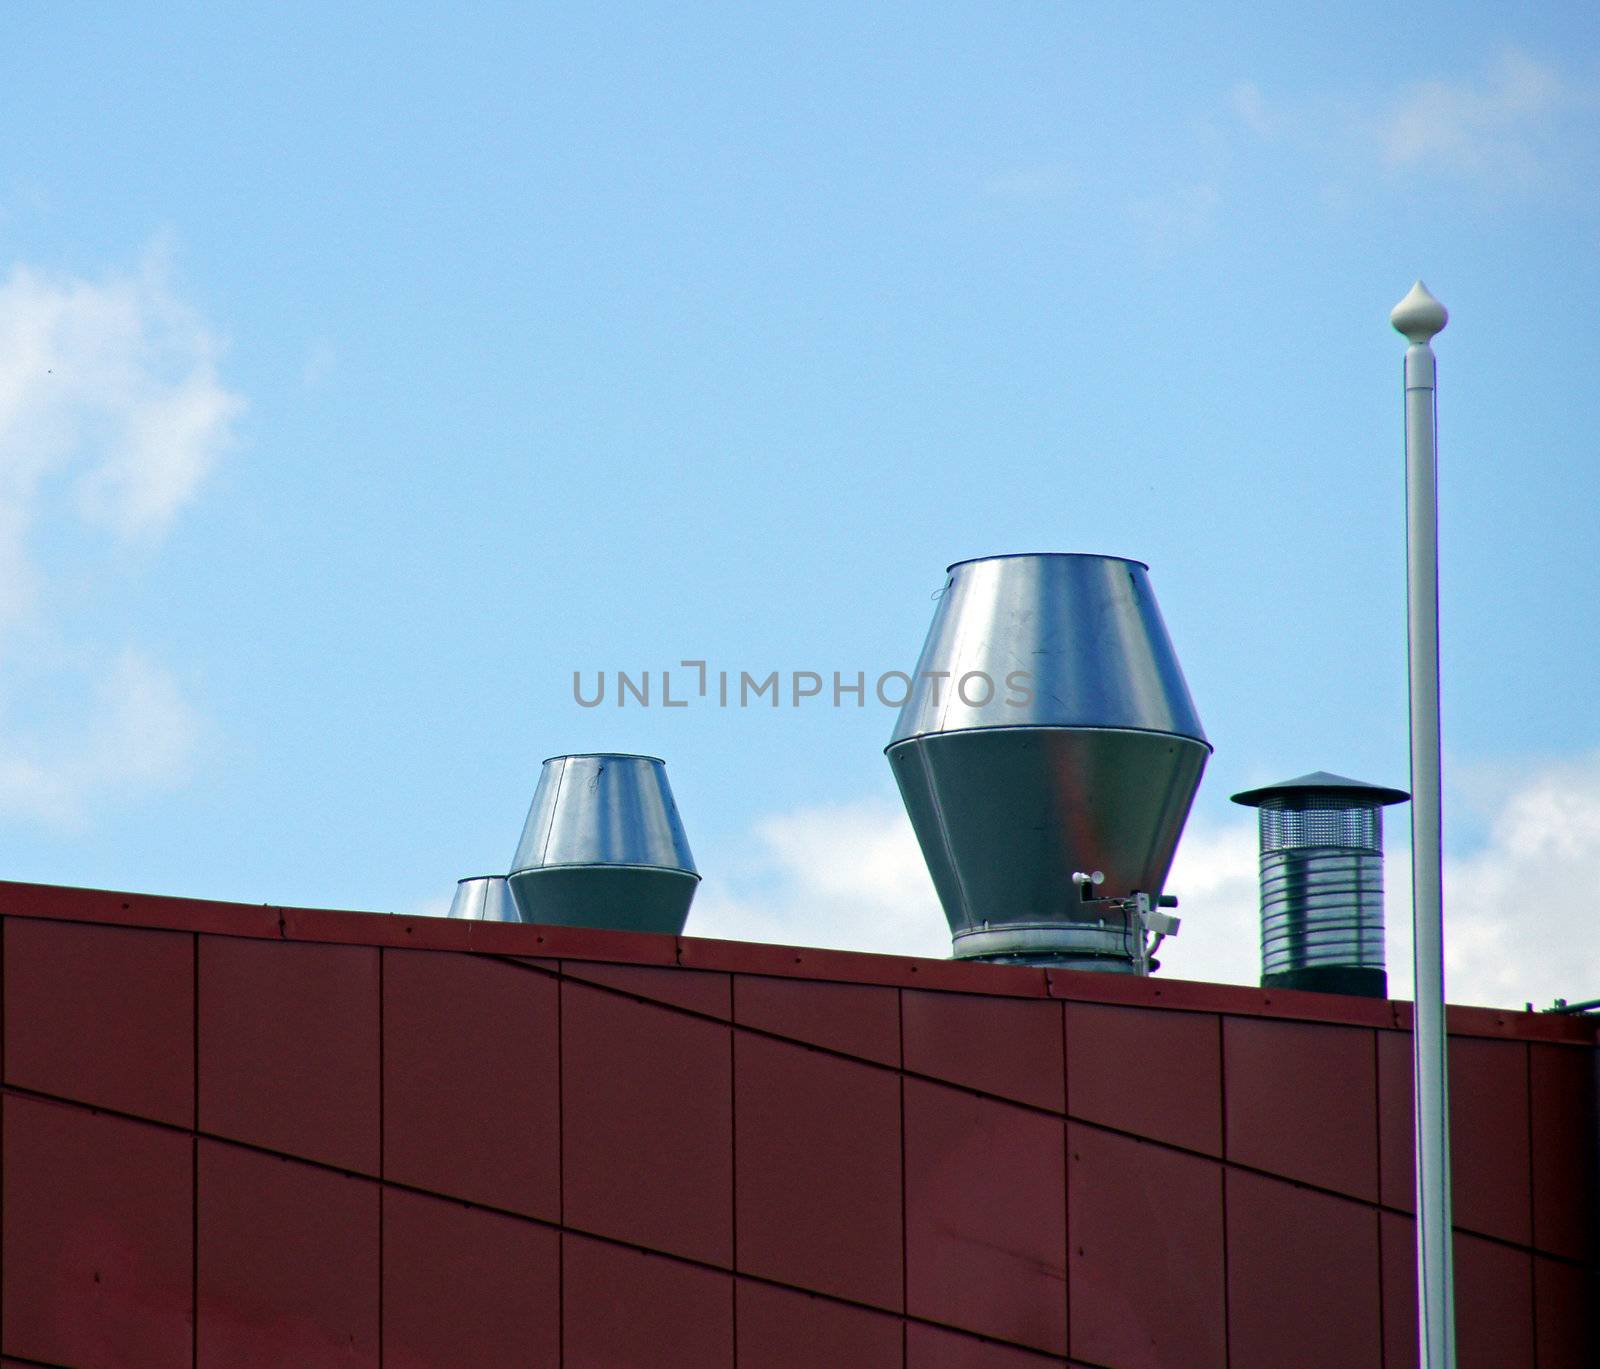  Ventilation on a roof on a background of the blue sky